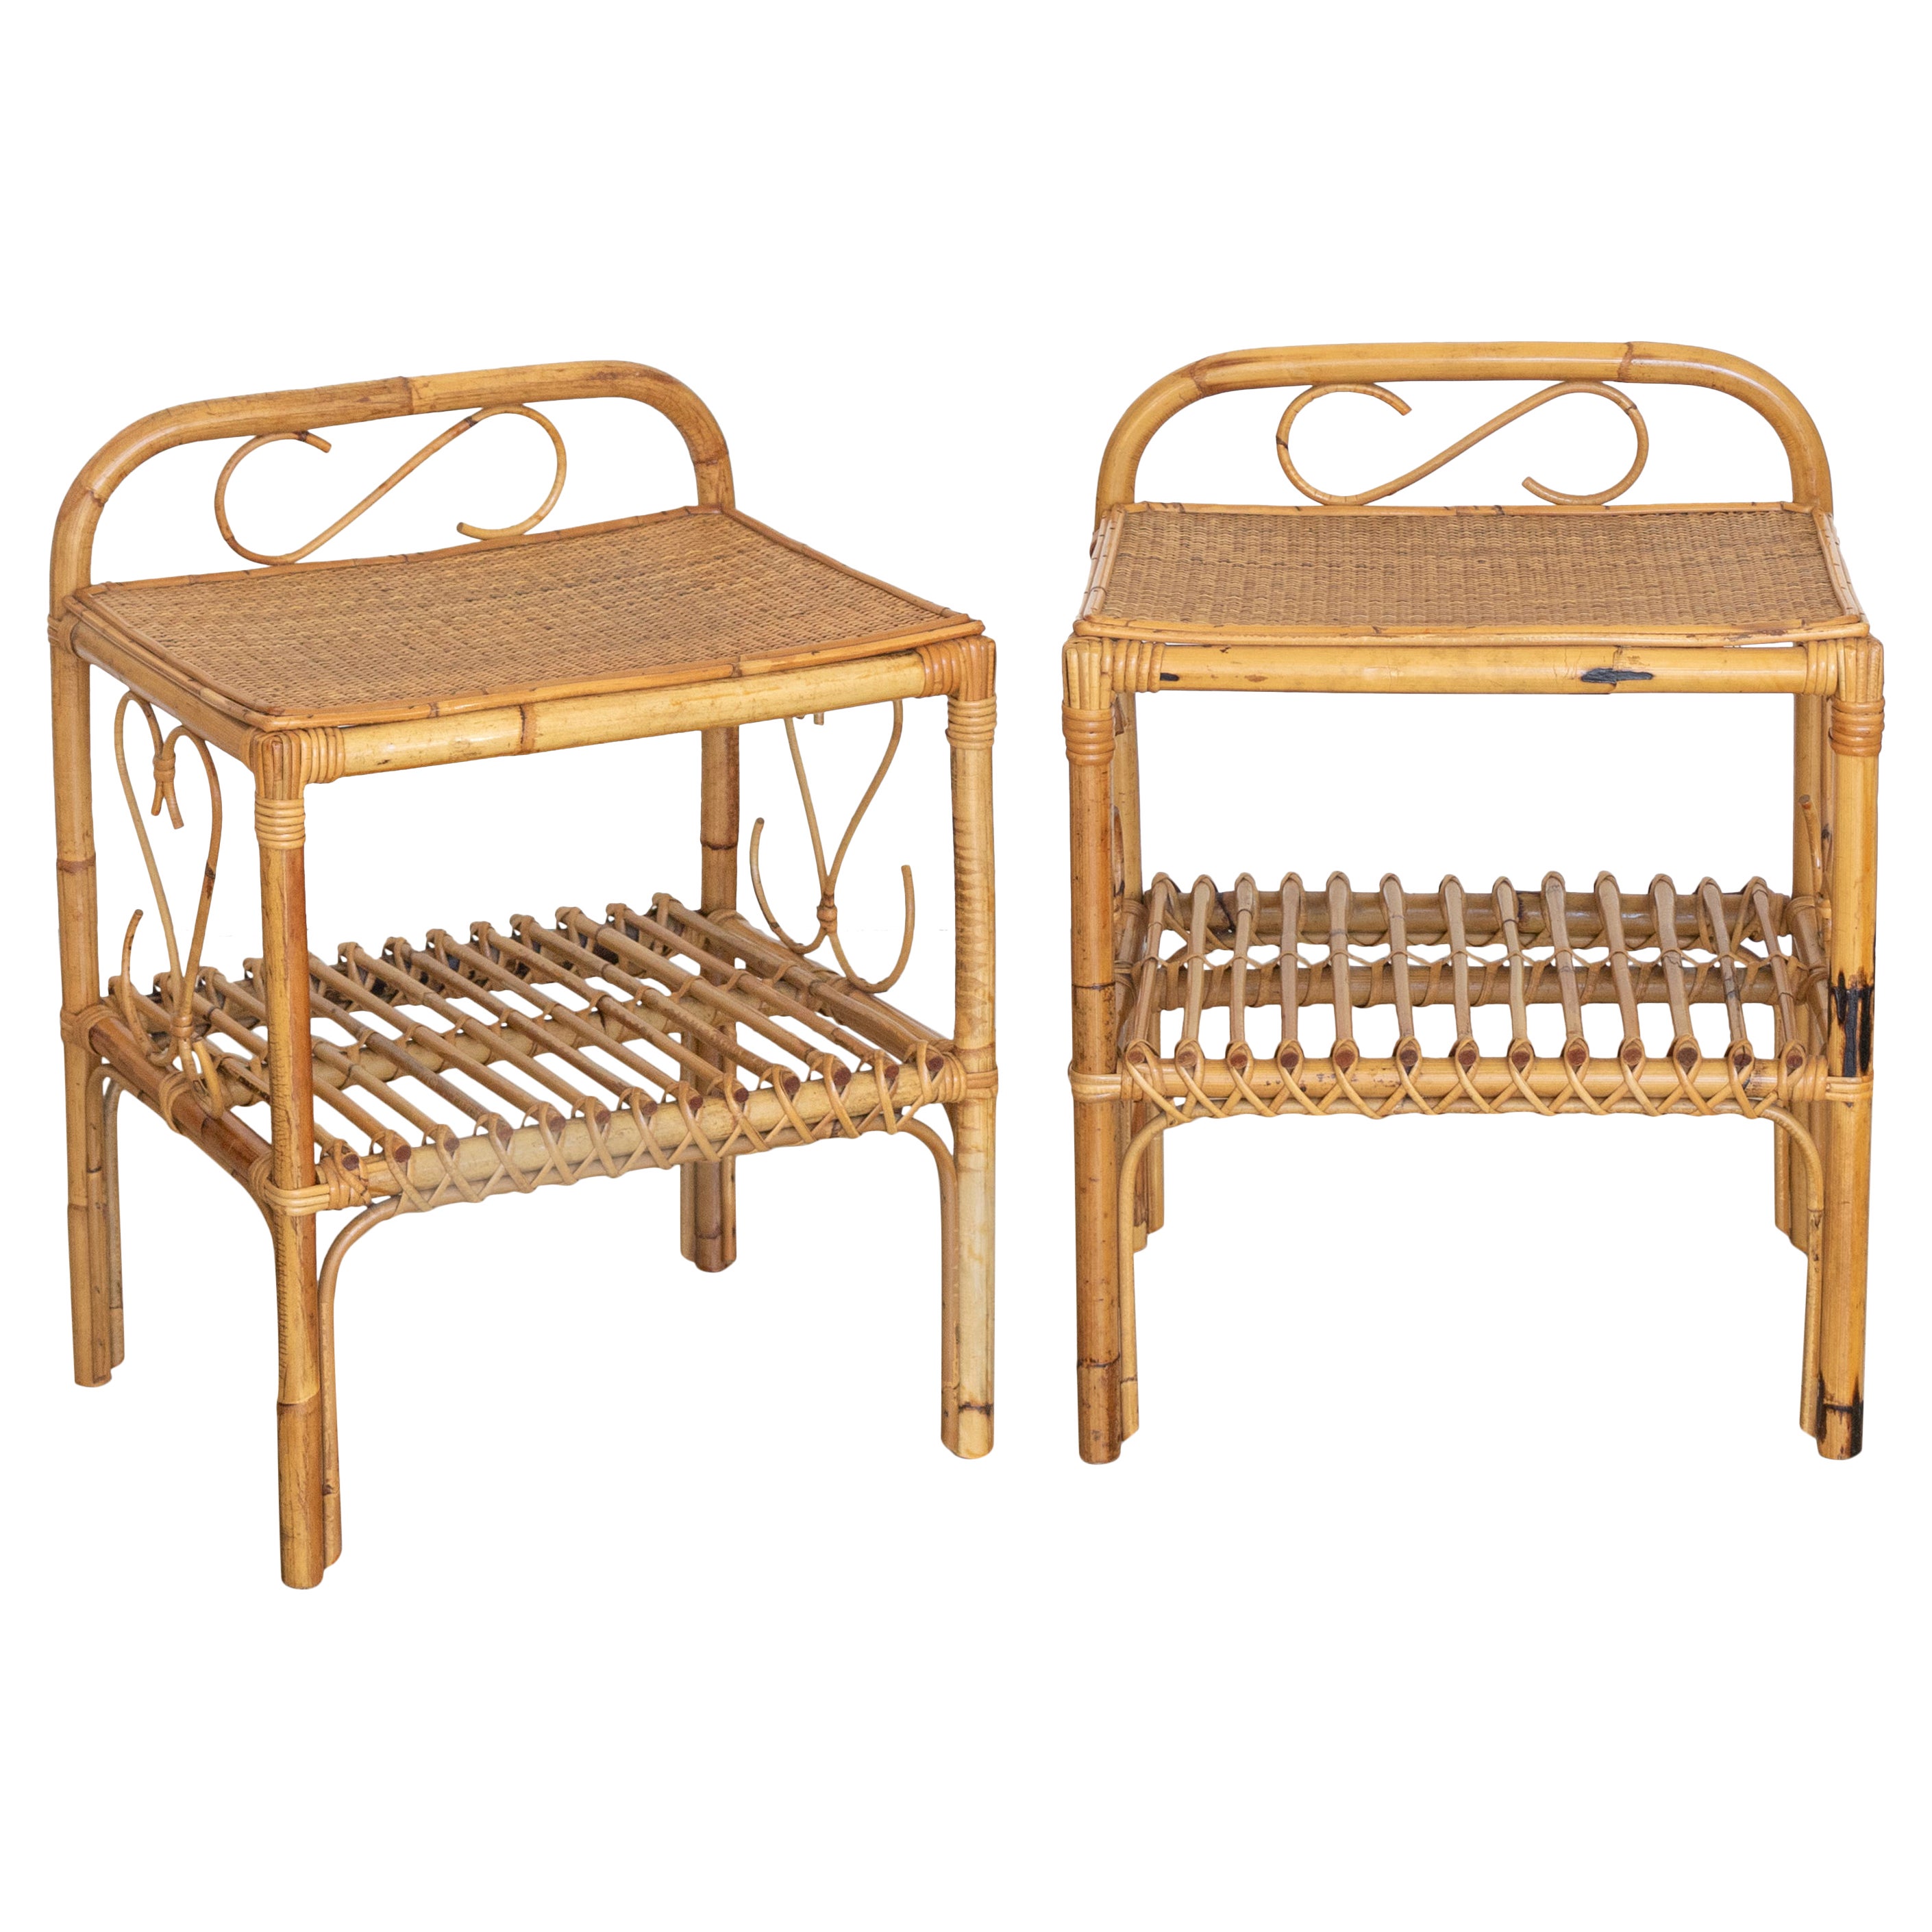 Pair of Italian Rattan Bed Side Tables